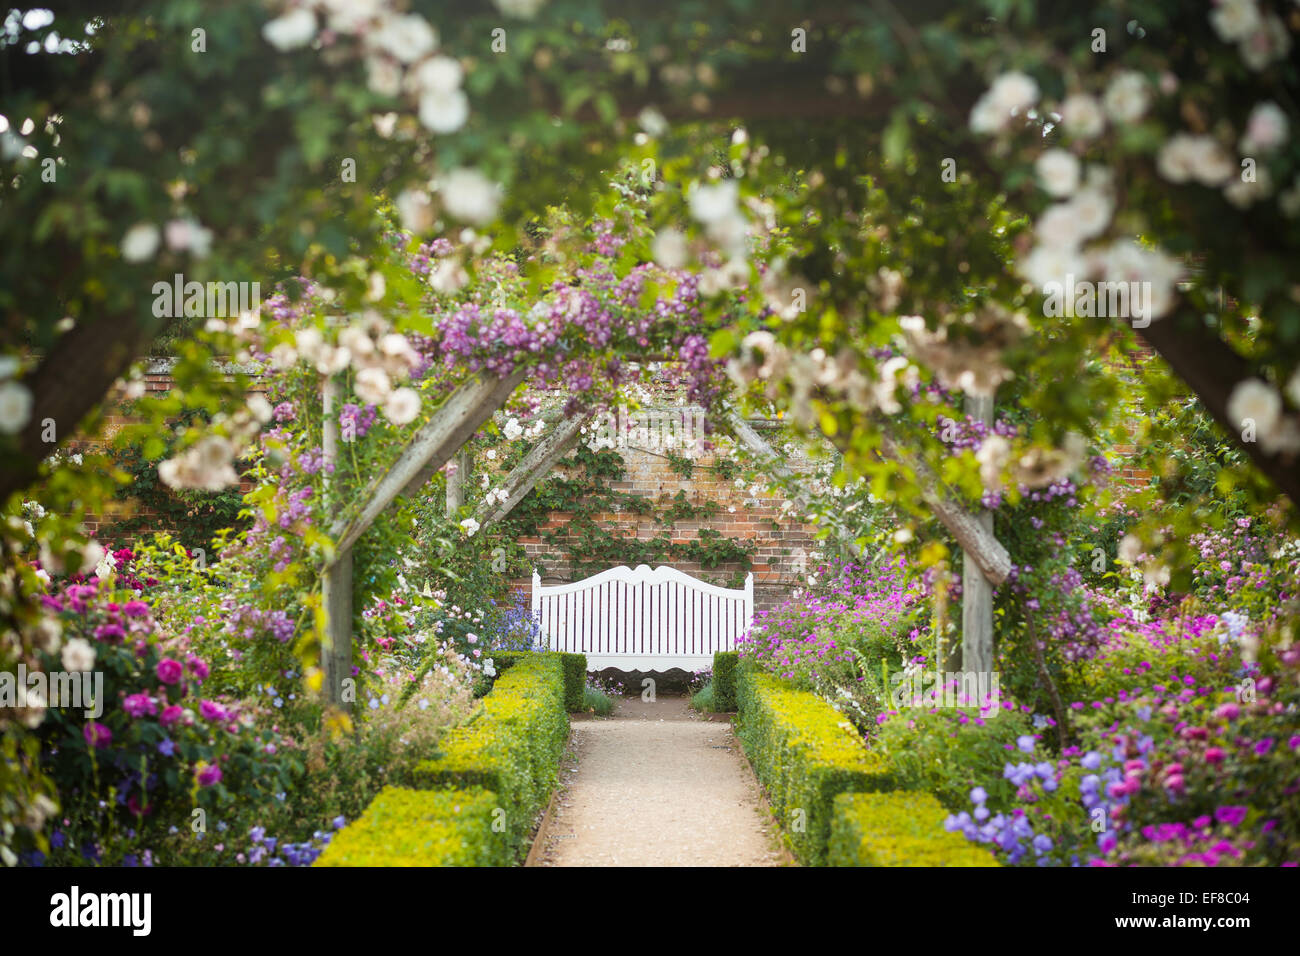 The walled rose garden at Mottisfont Abbey, Hampshire, England Stock Photo